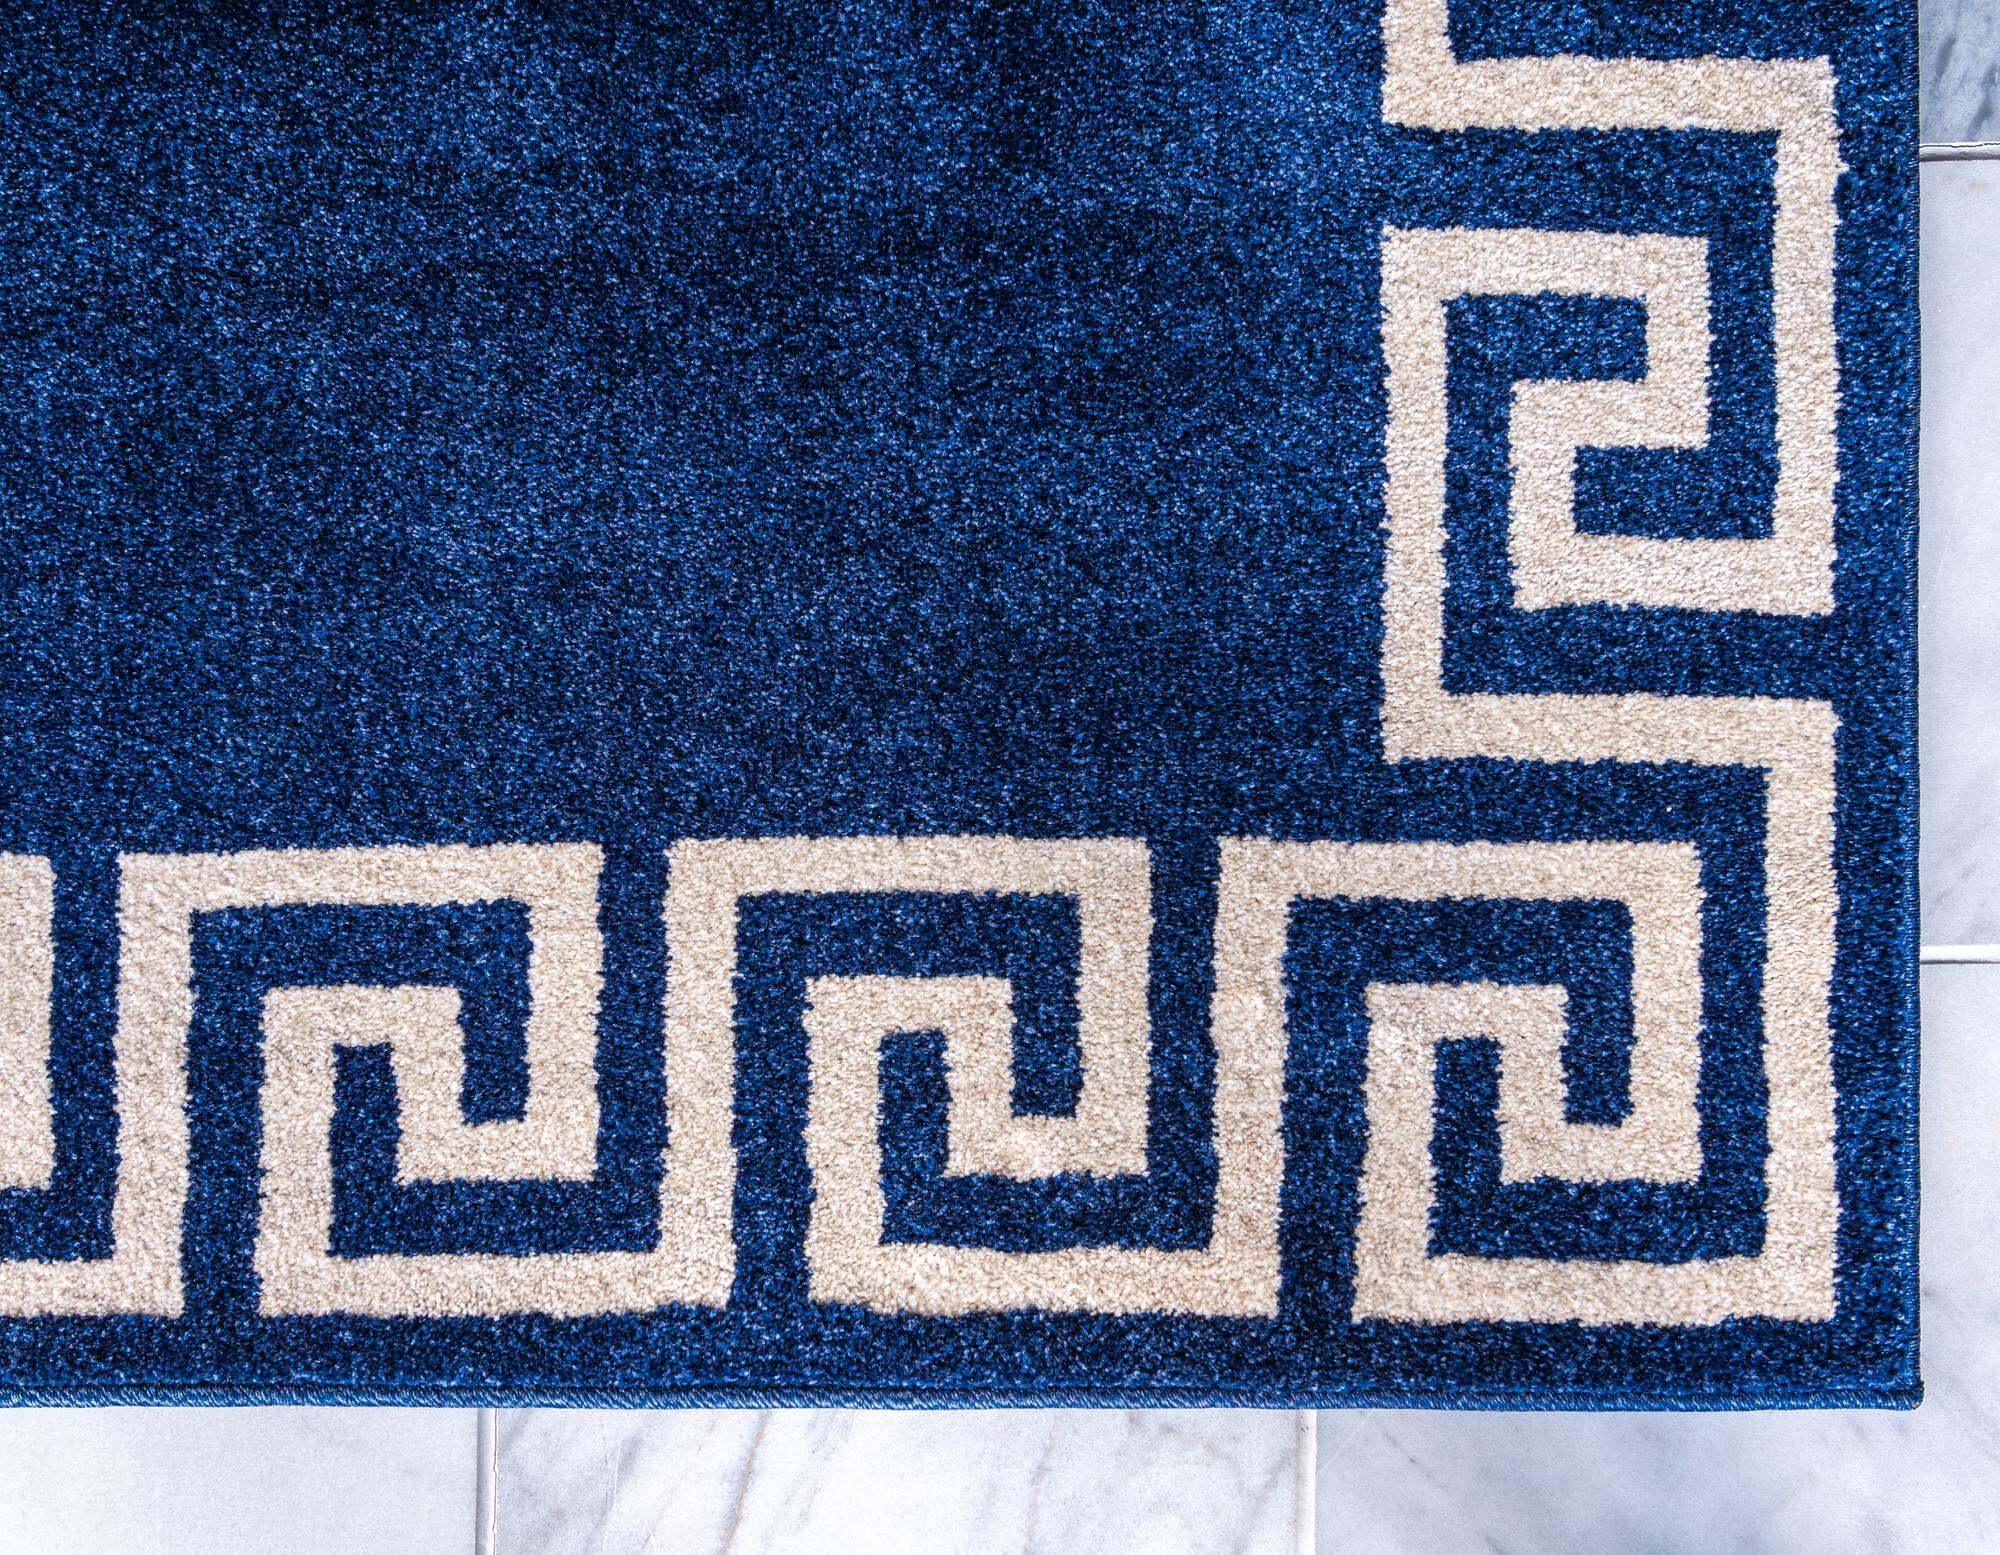 Unique Loom Indoor Rugs - Athens 7' x 10' Rectangle Rug Navy Blue